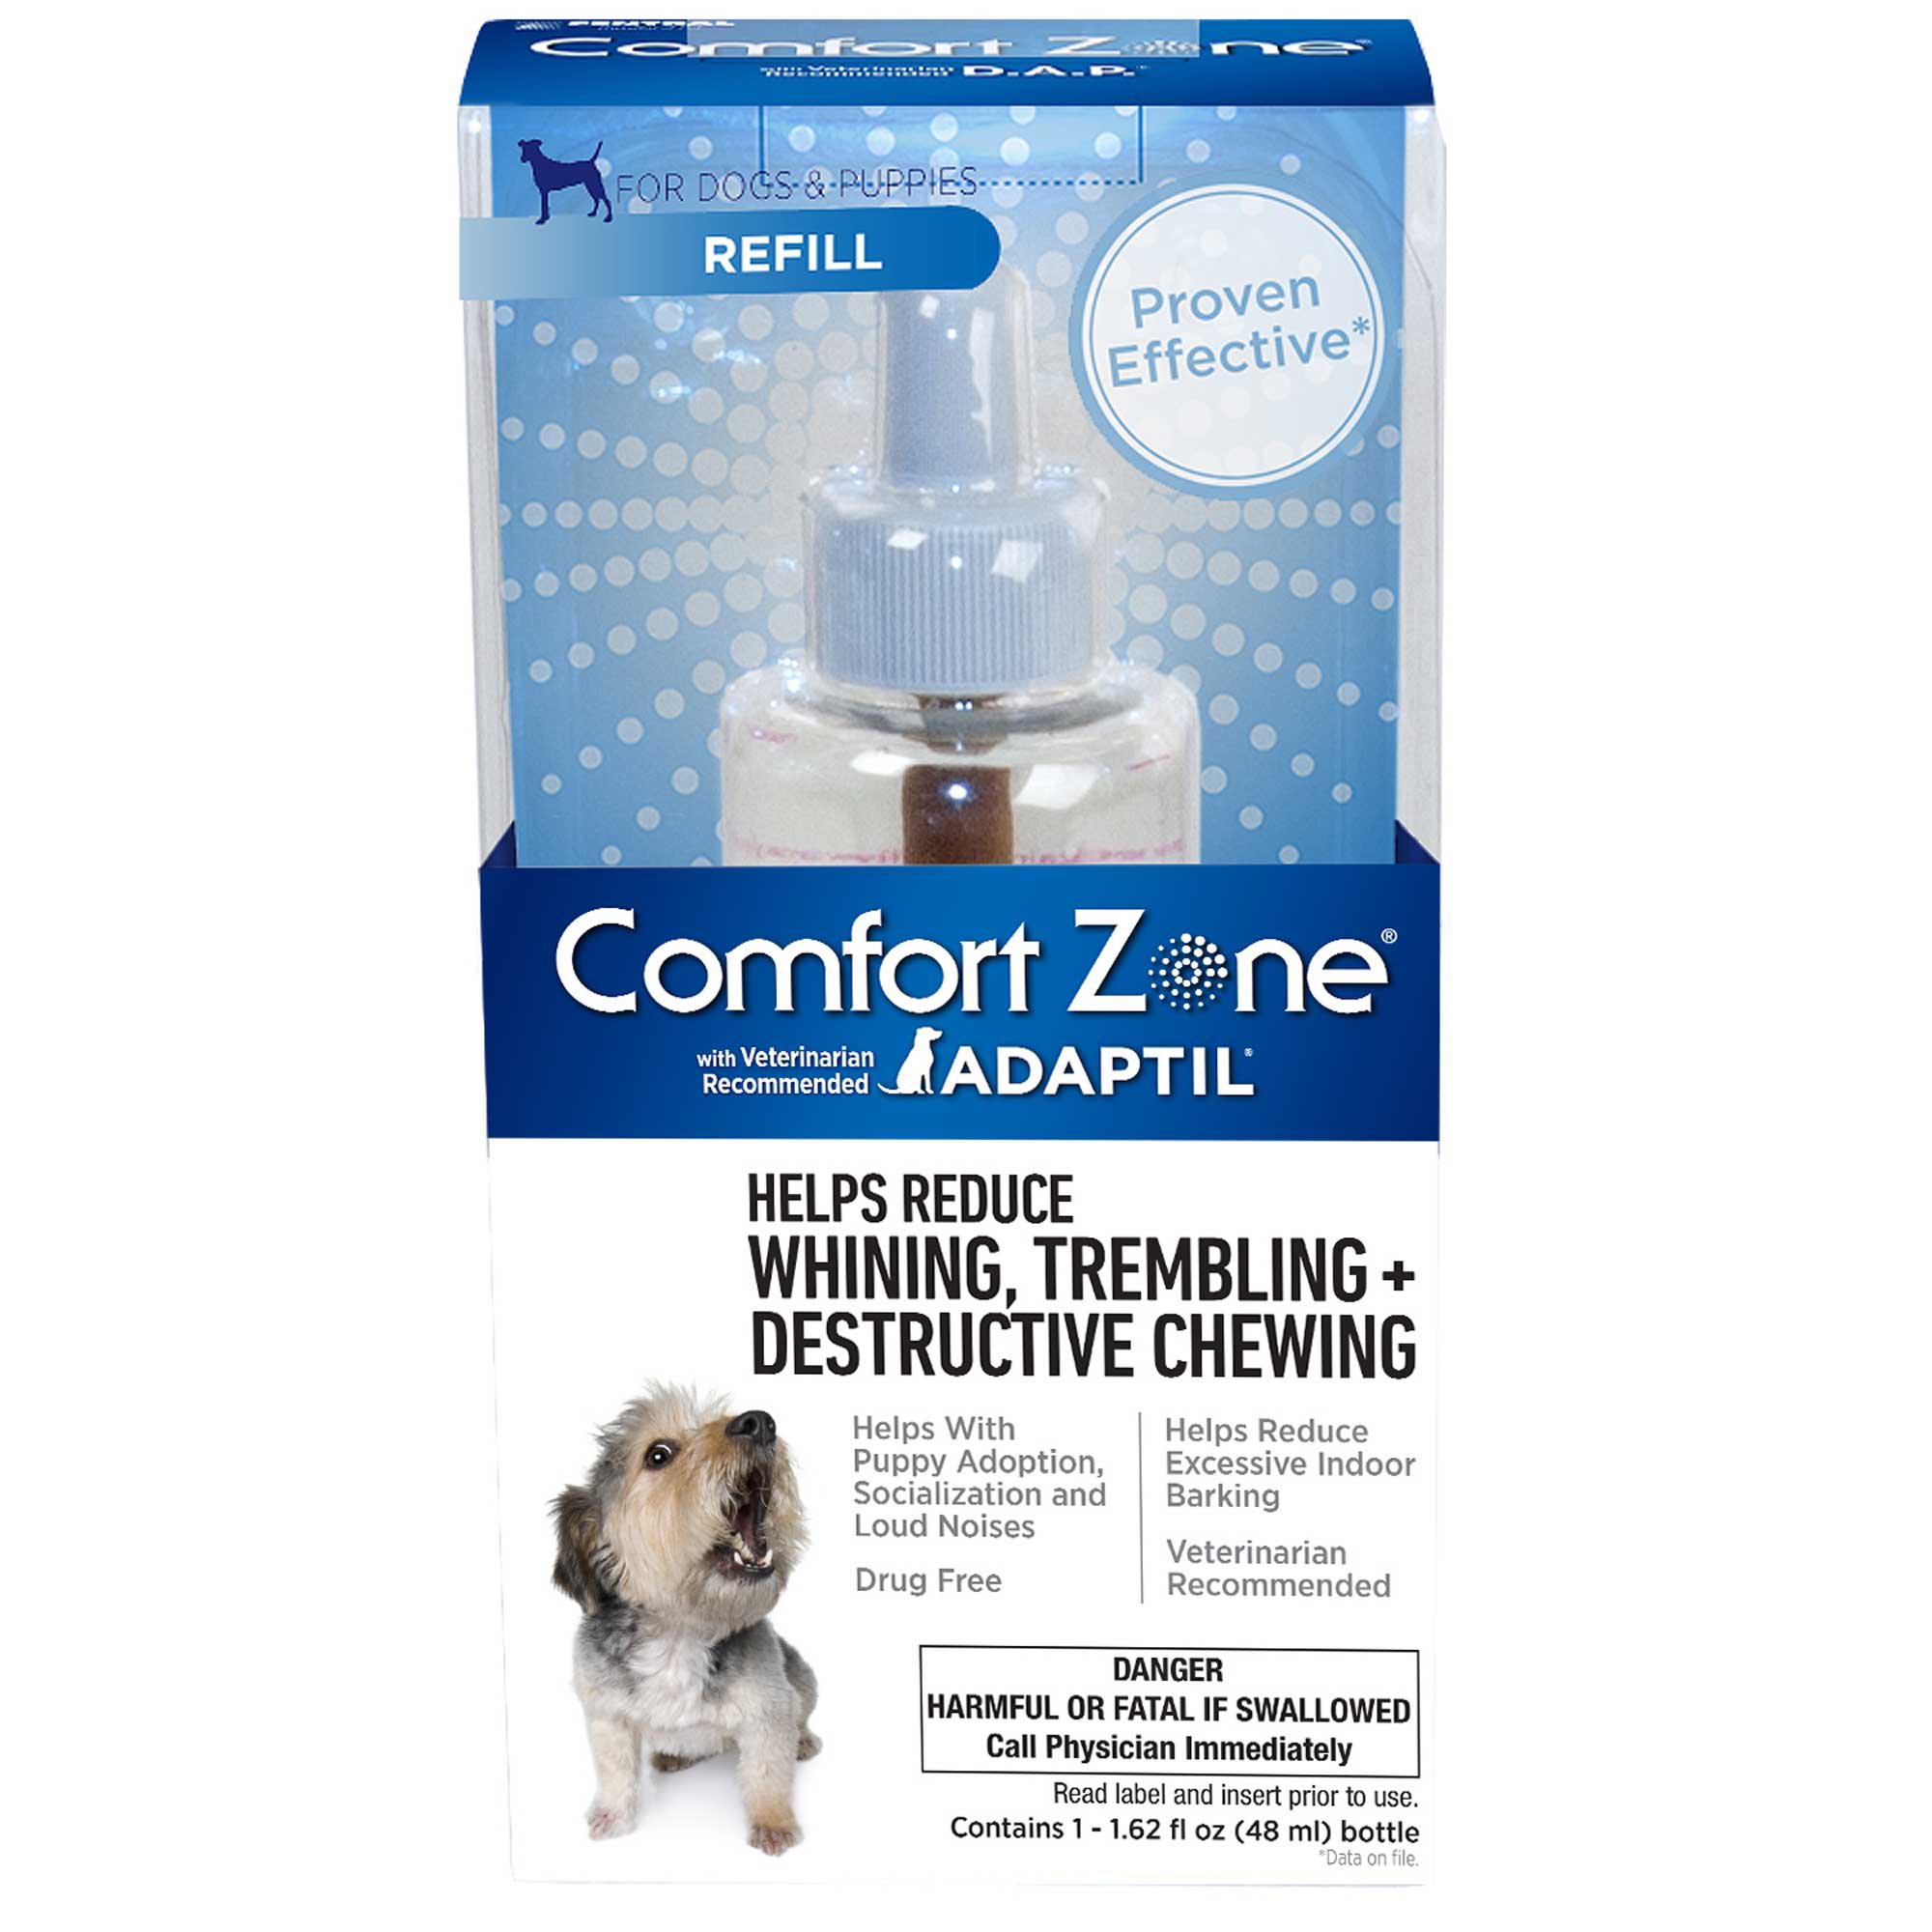 Comfort Zone Refill with D.A.P. for Dogs | Petco